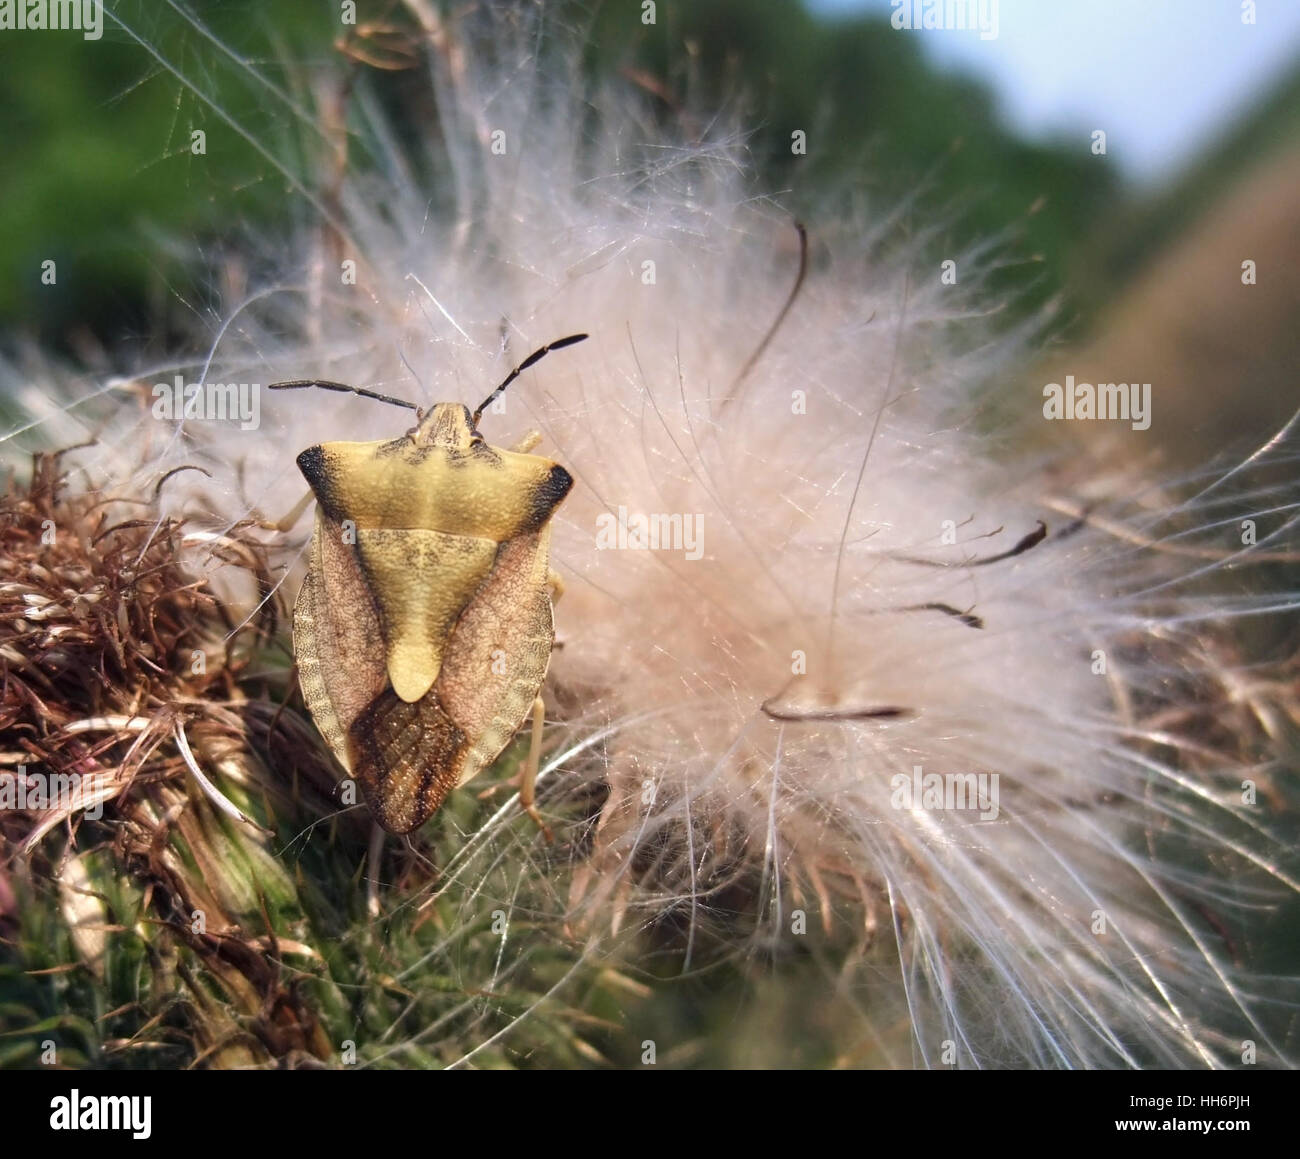 outdoor shot of a stink bug on fluffy seed in sunny ambiance Stock Photo